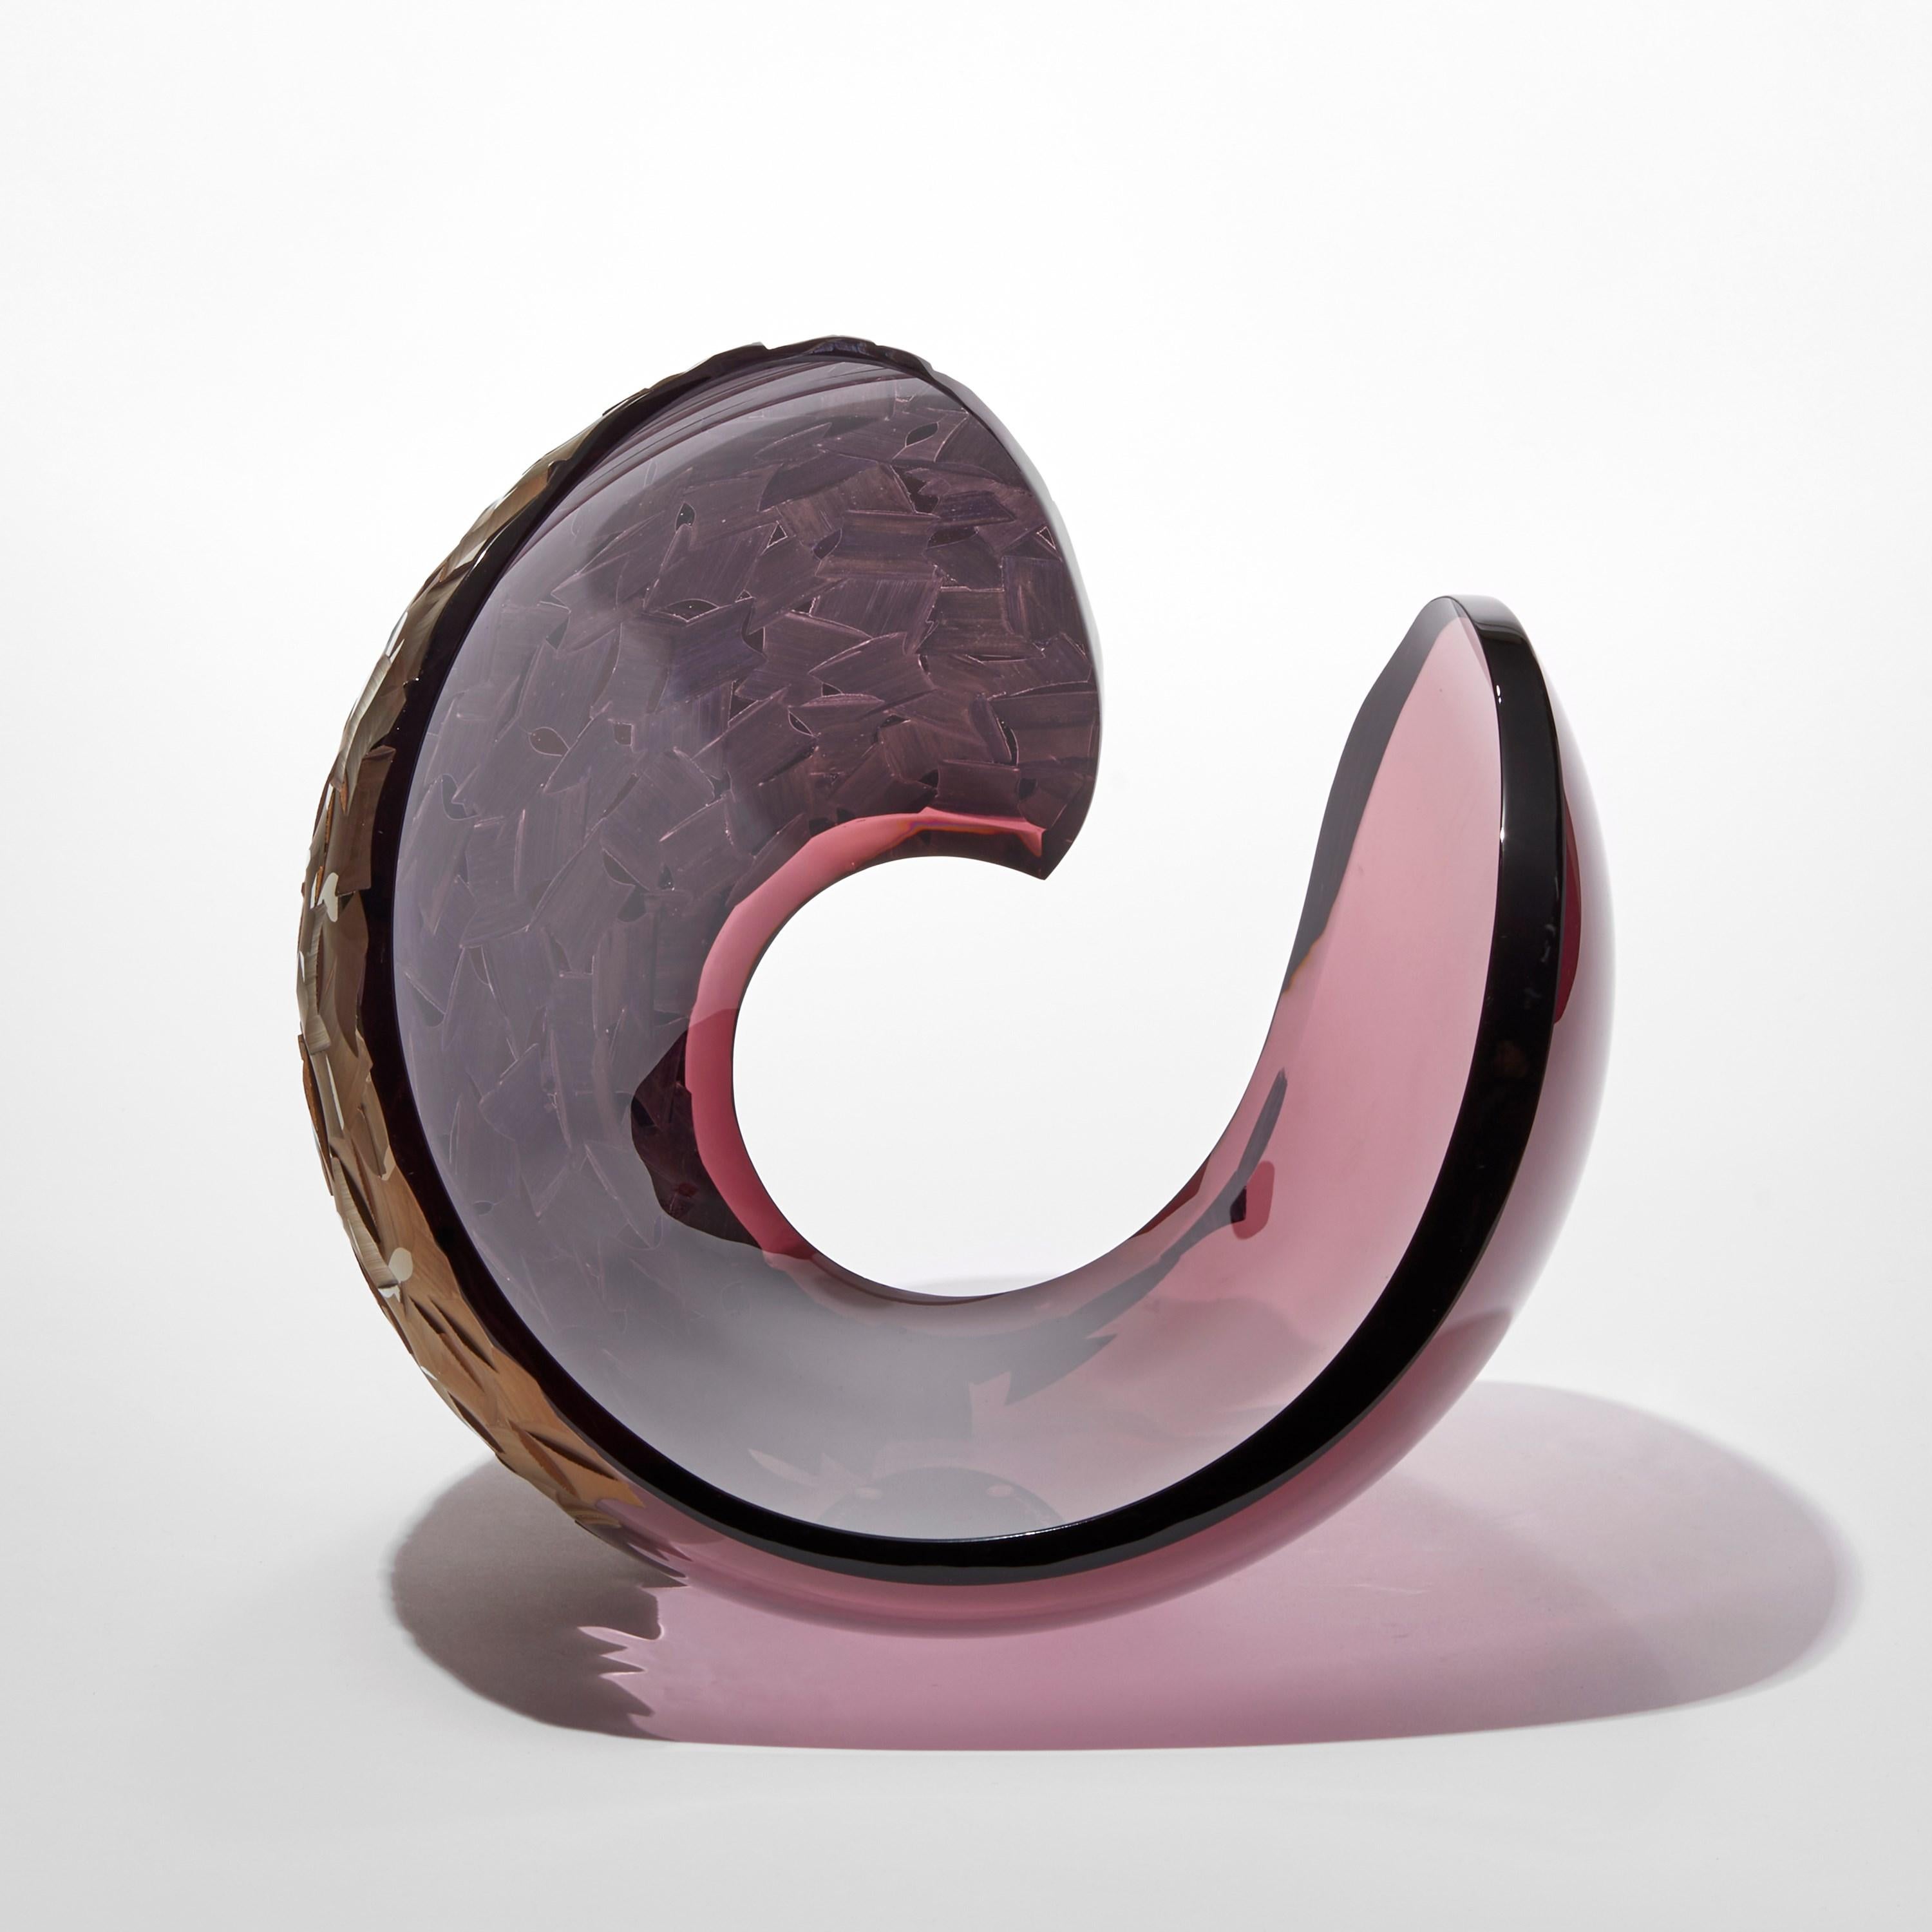 Planet in Burgundy Slate, aubergine & bronze glass sculpture by Lena Bergström In New Condition For Sale In London, GB